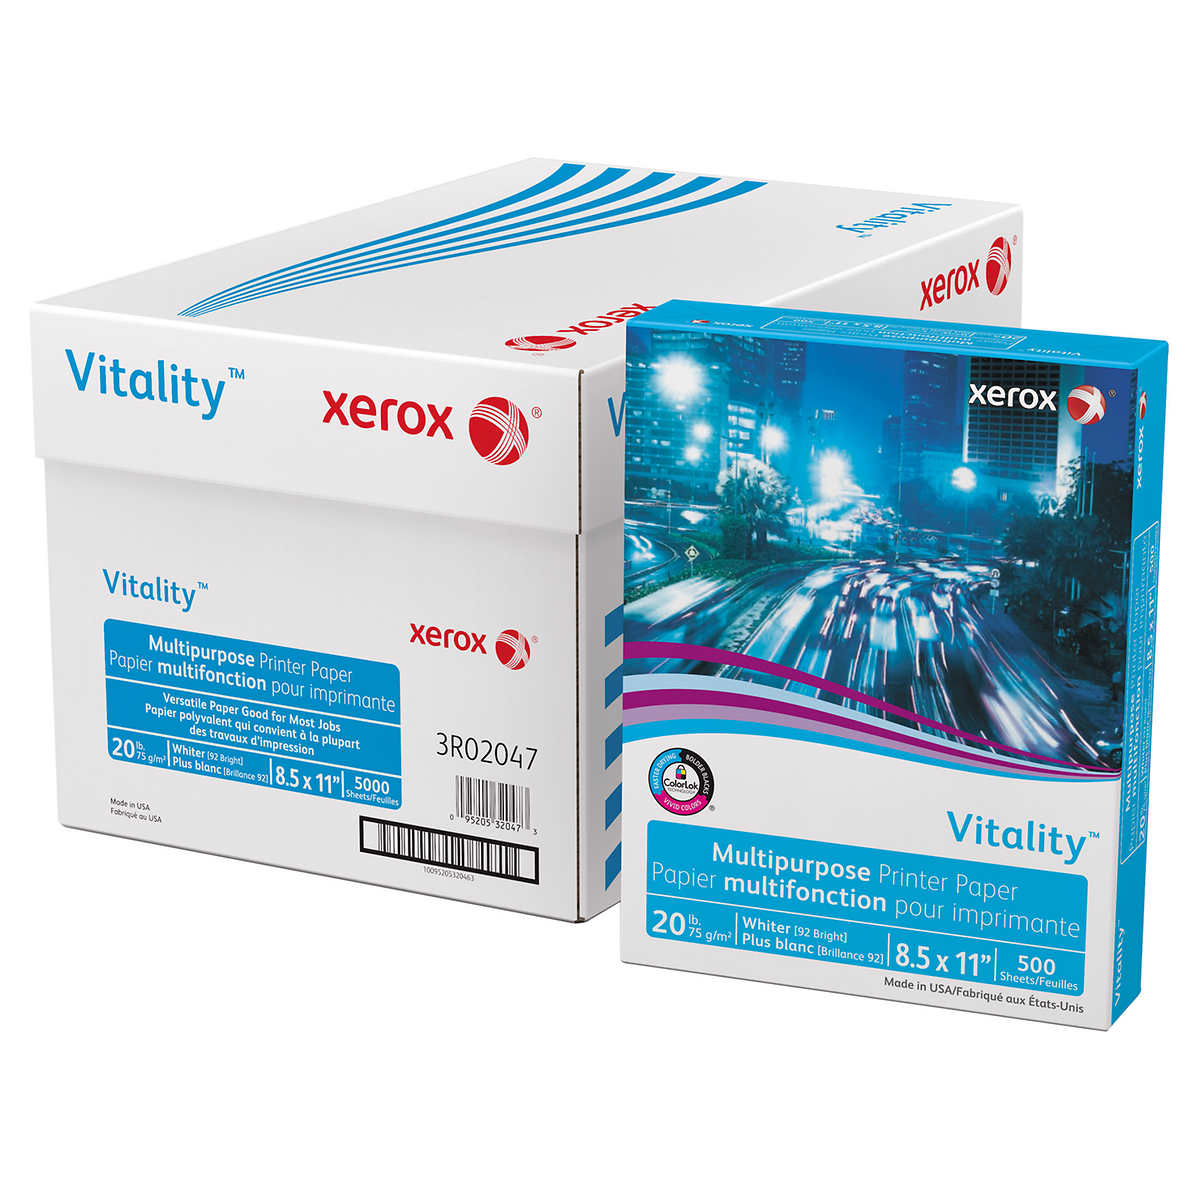 Green Ream of 500 Sheets Legal Paper Size 20 Lb 30% Recycled Xerox Vitality Colors Multipurpose Printer Paper